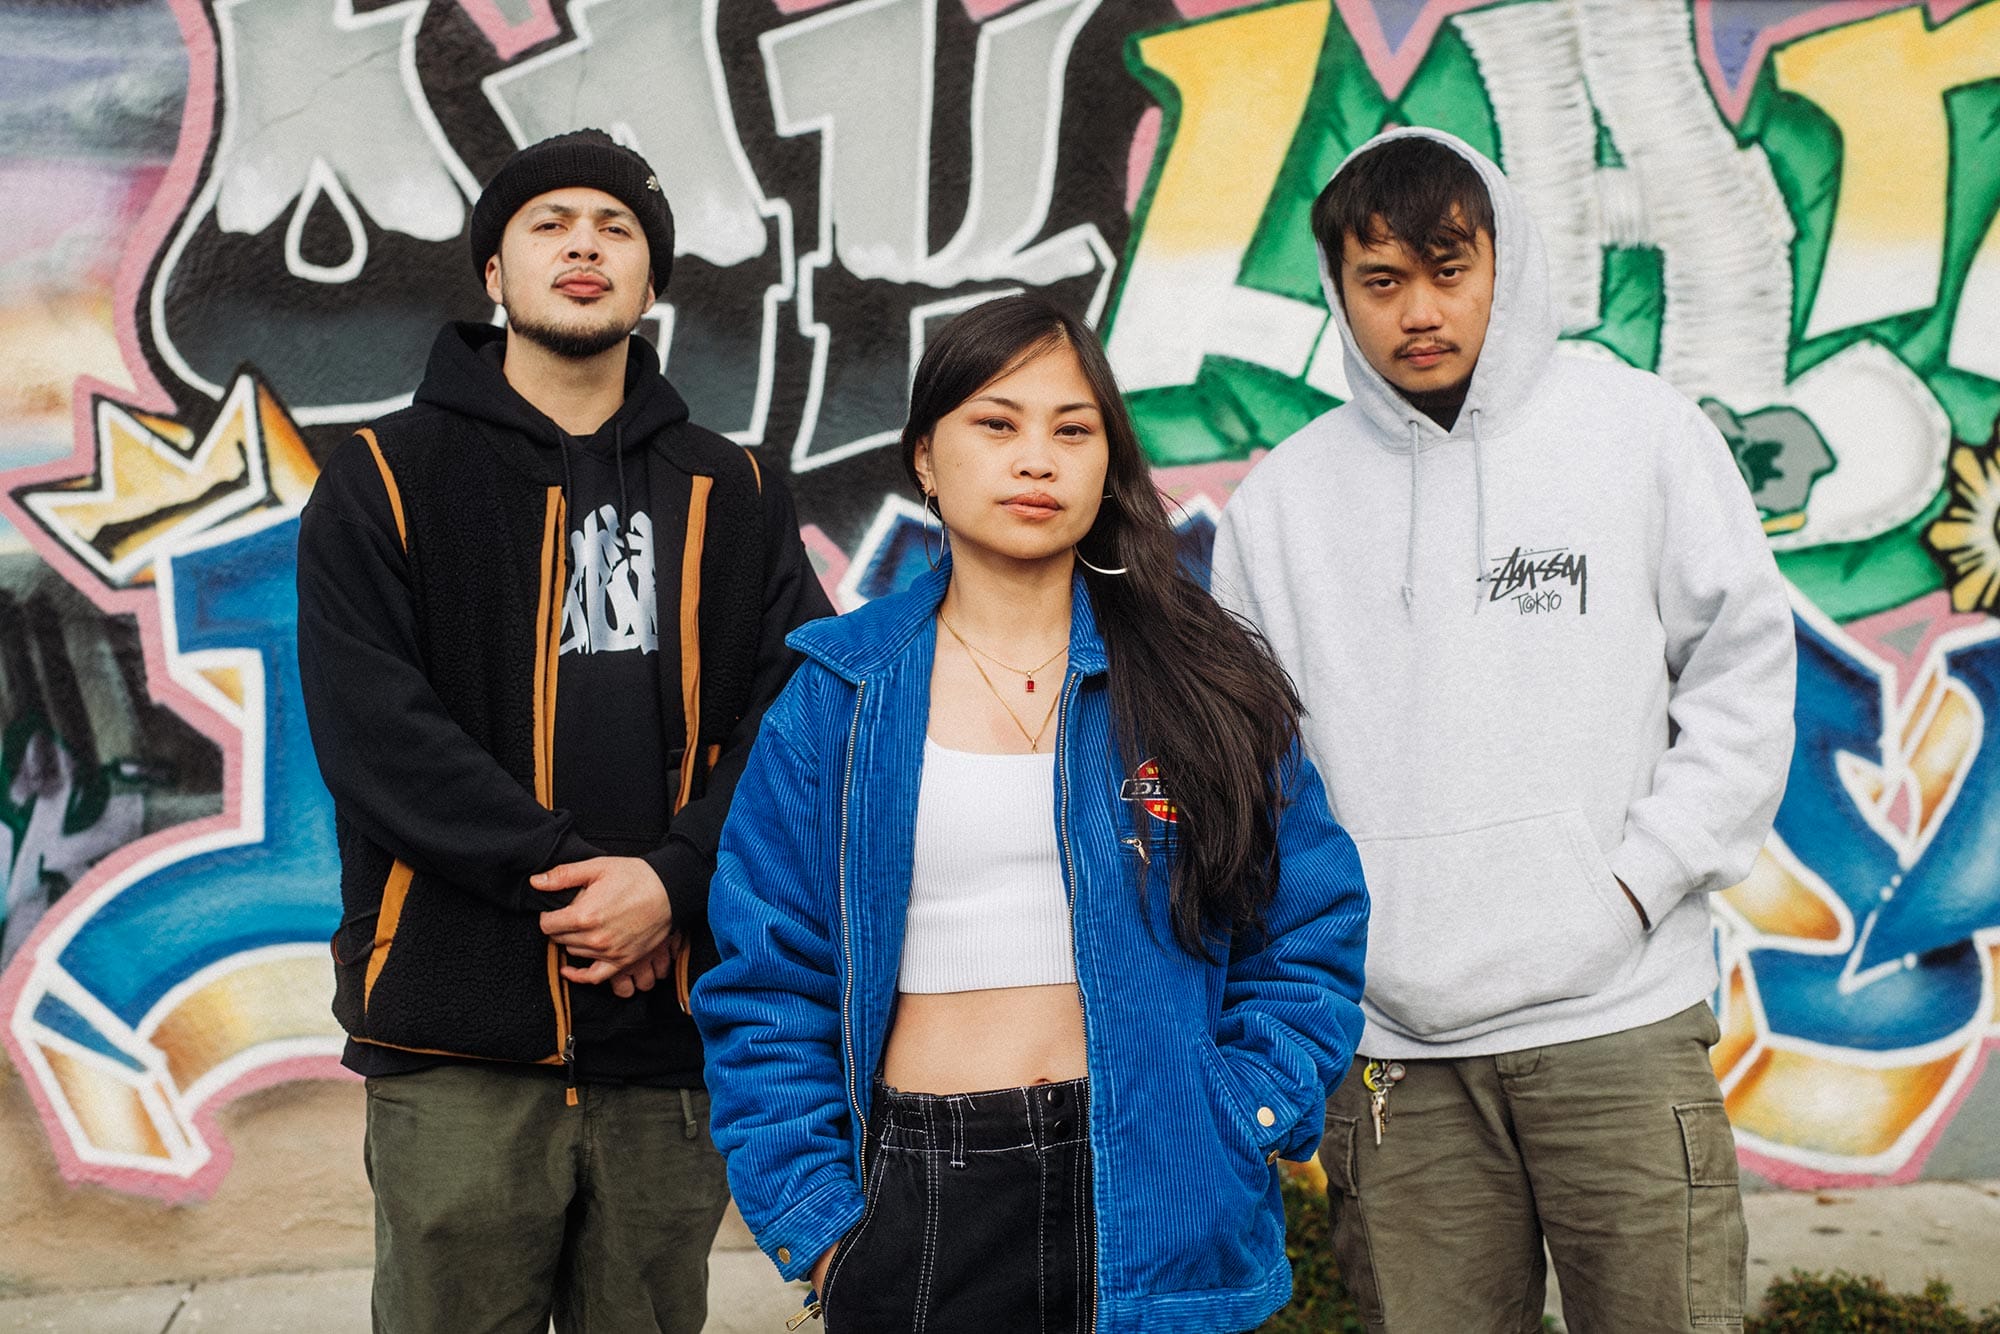 Ruby Ibarra and two of her collaborators in front of a mural with graffiti.